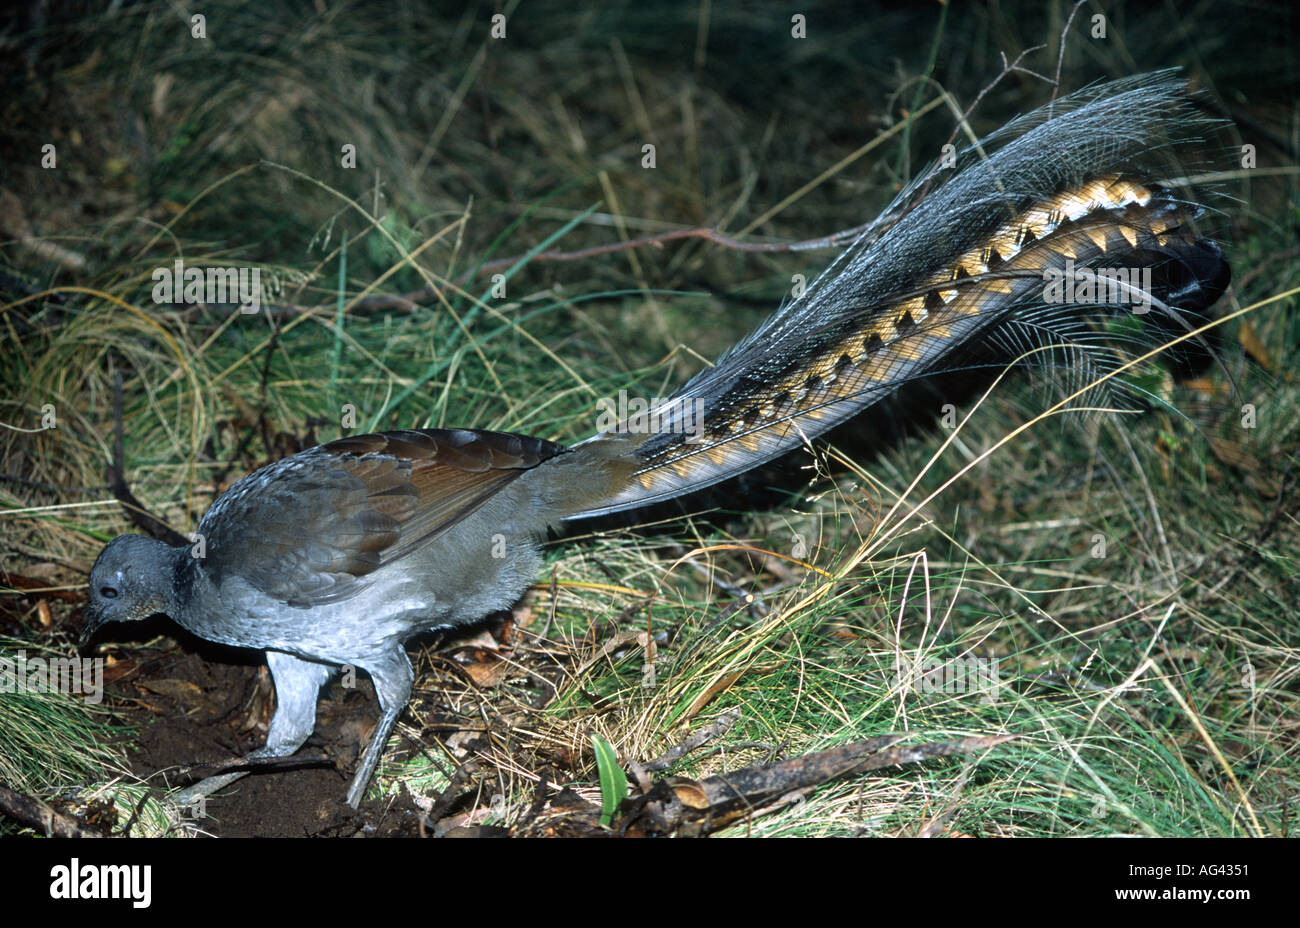 Male Superb Lyrebird,  Menura novaehollandiae is a large Australian songbird noted for its tail  and clever mimicry of sounds. Stock Photo